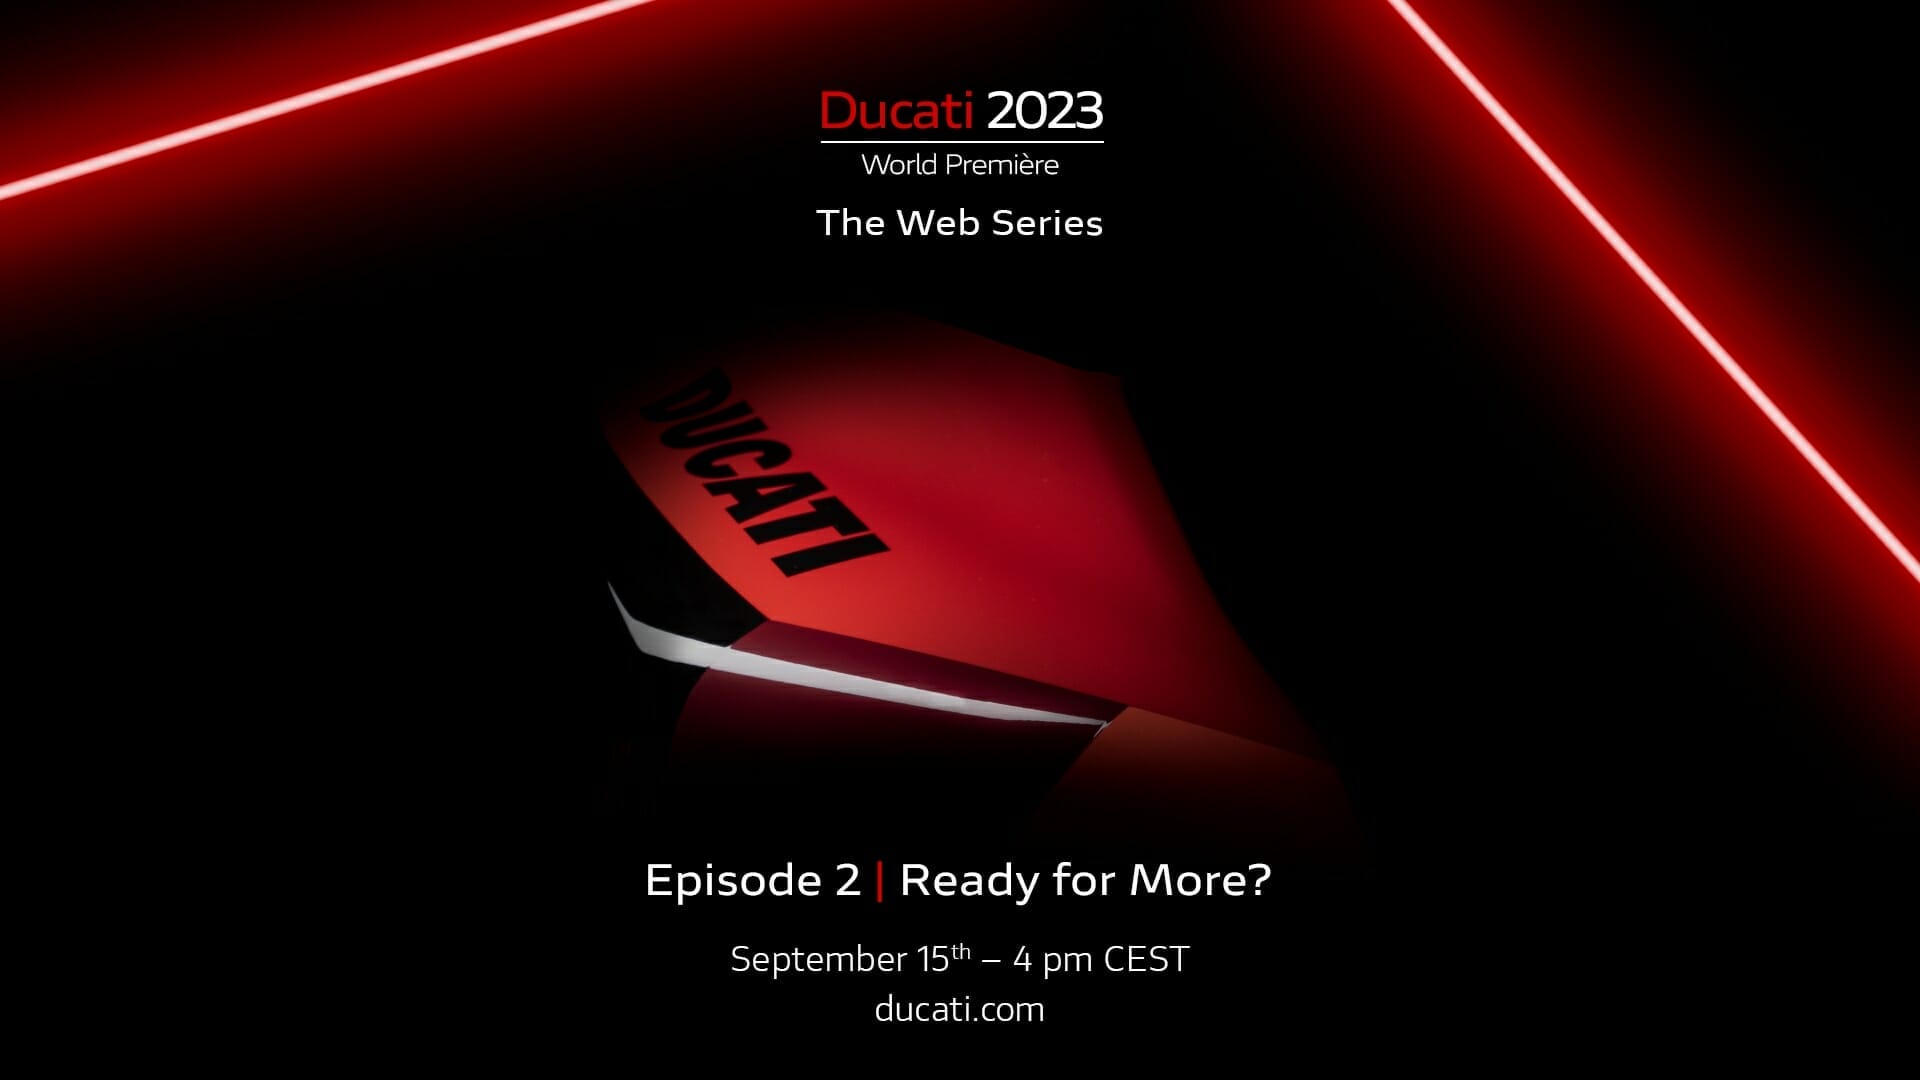 Ducati World Première 2023 – Episode 2: Ready for More? - MOTORCYCLES.NEWS